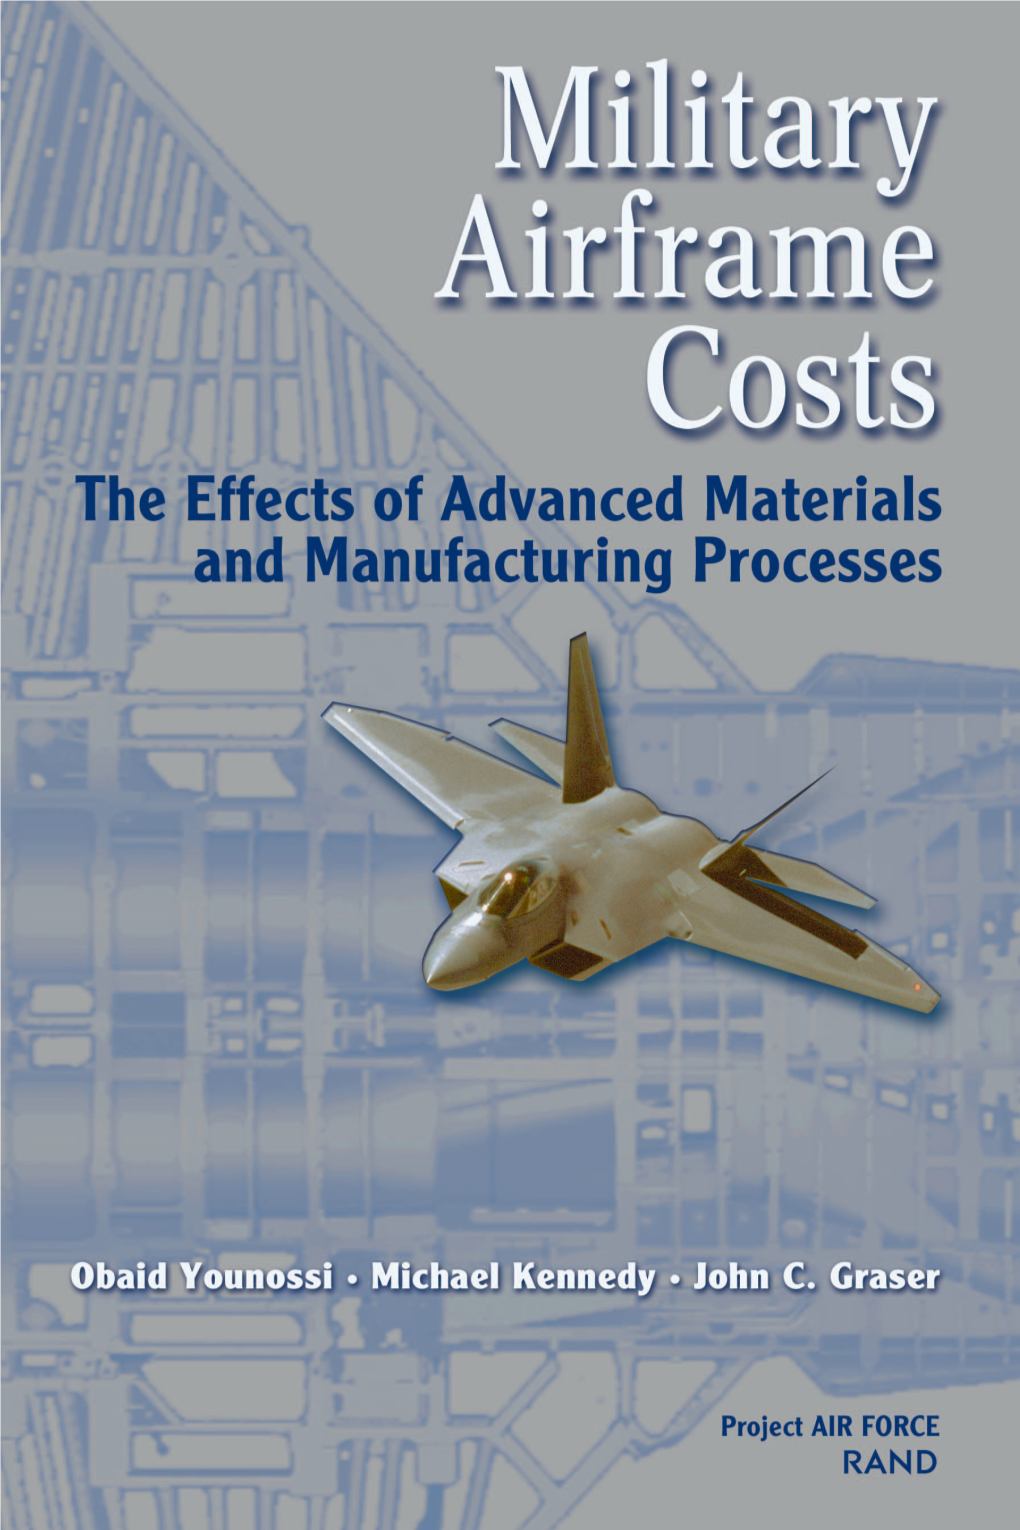 Military Airframe Costs : the Effects of Advanced Materials and Manufacturing Processes / Obaid Younossi, Michael Kennedy, John C